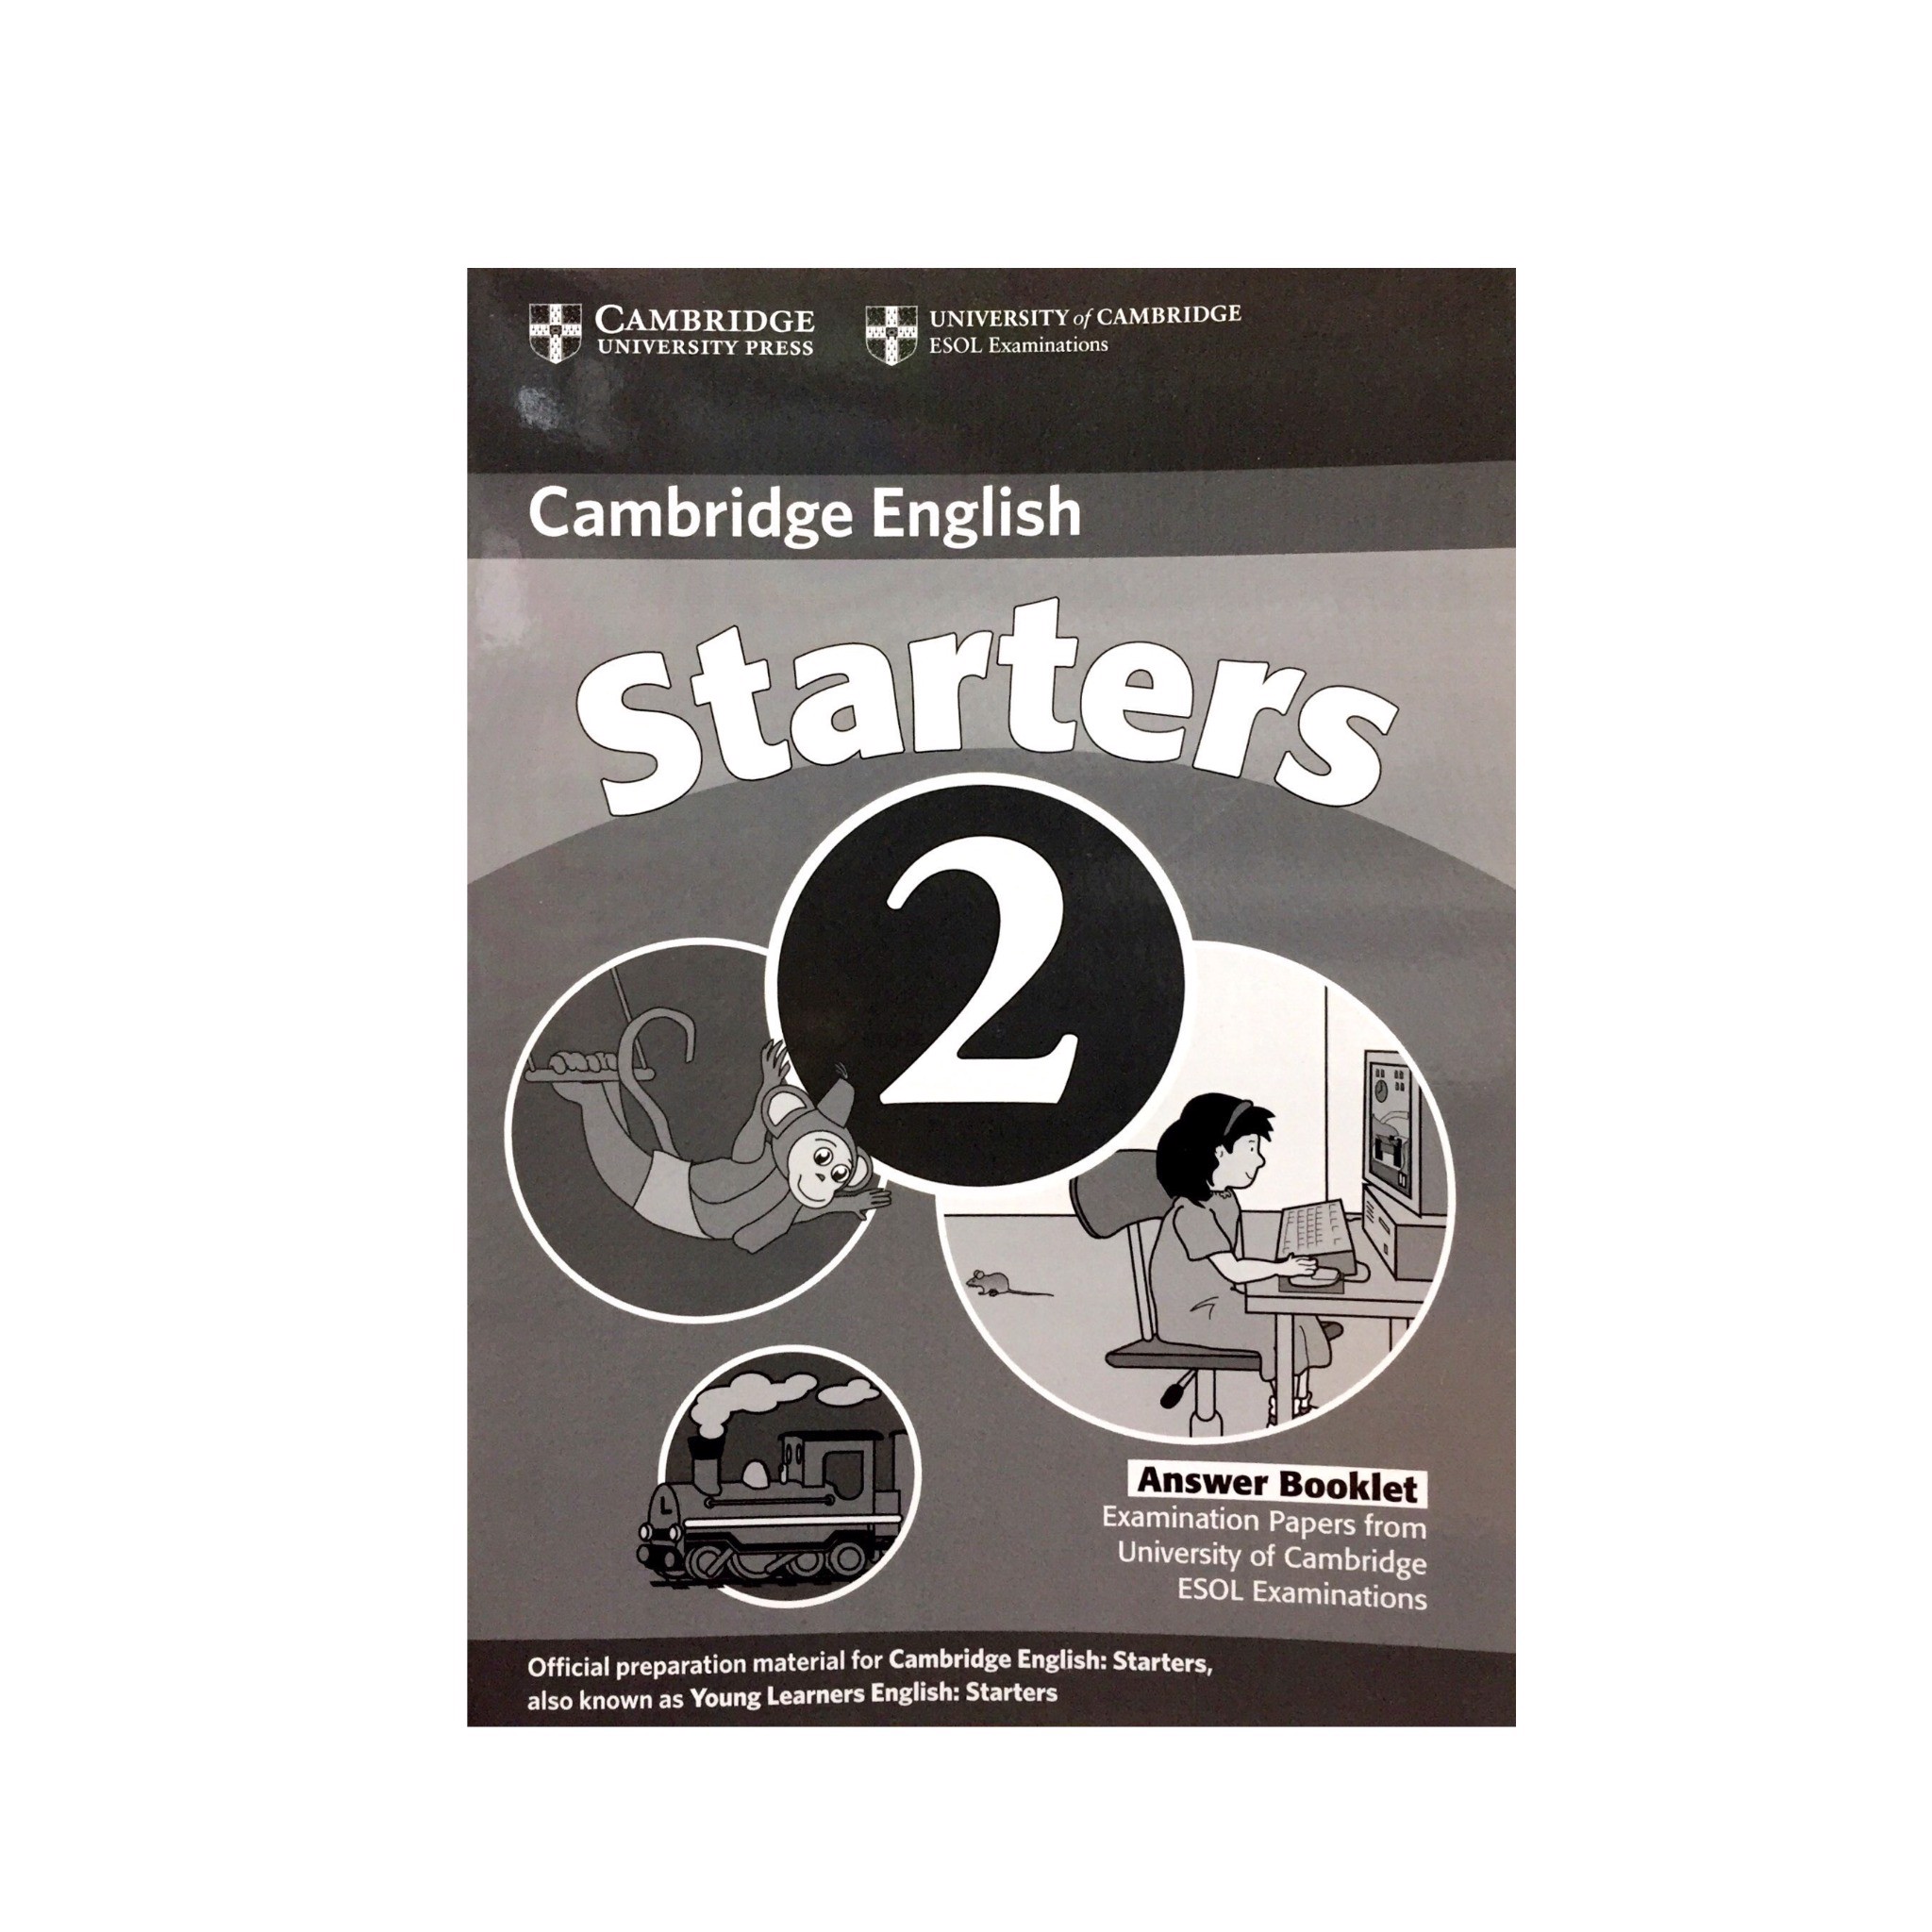 Cambridge English - Starters 2 - Answer Booklet